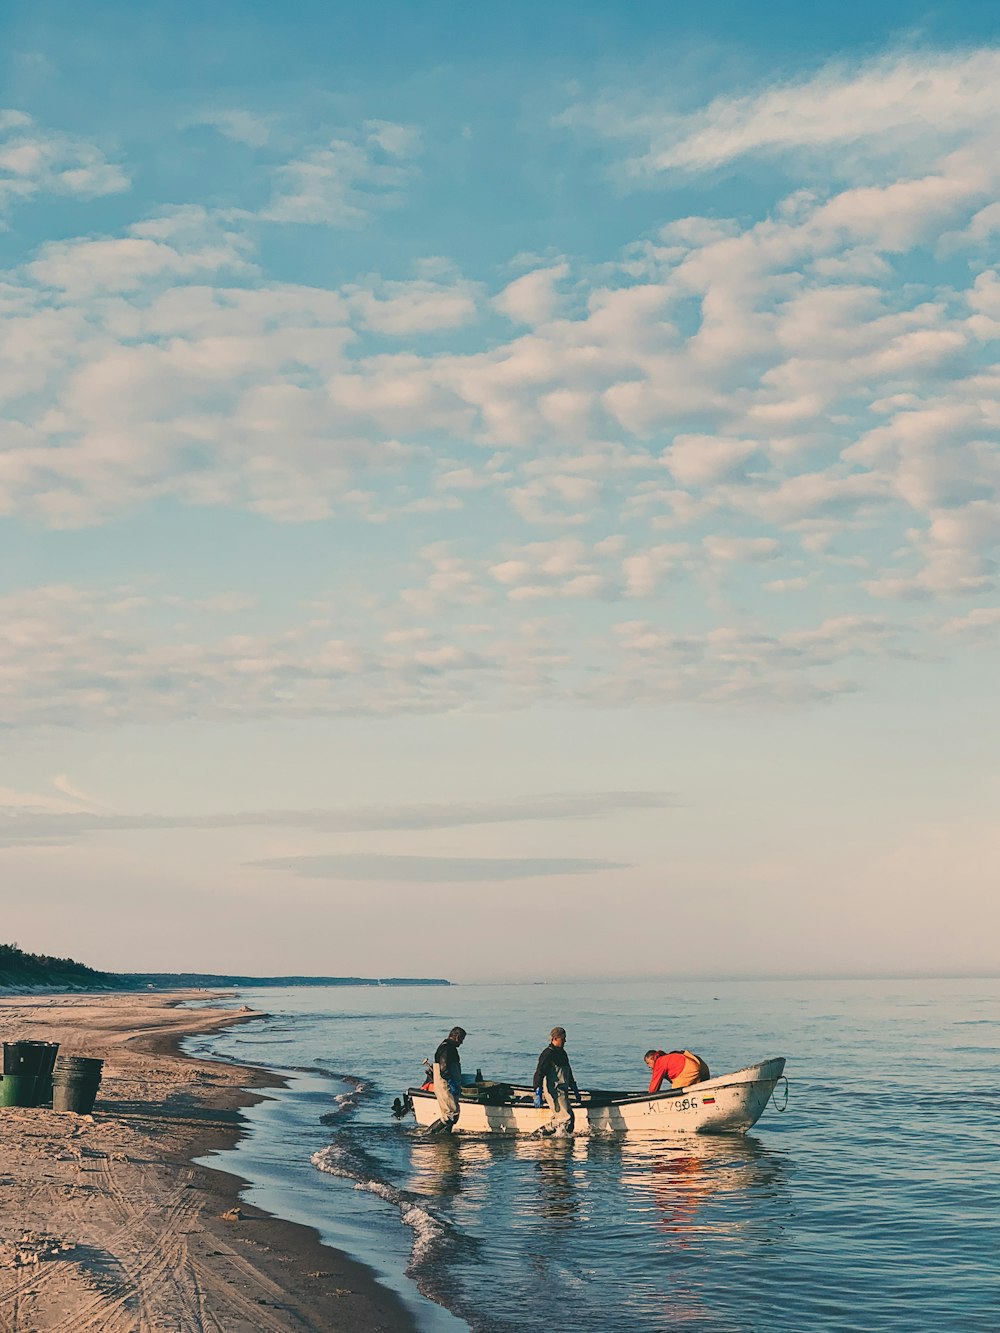 two people in a small boat on the beach